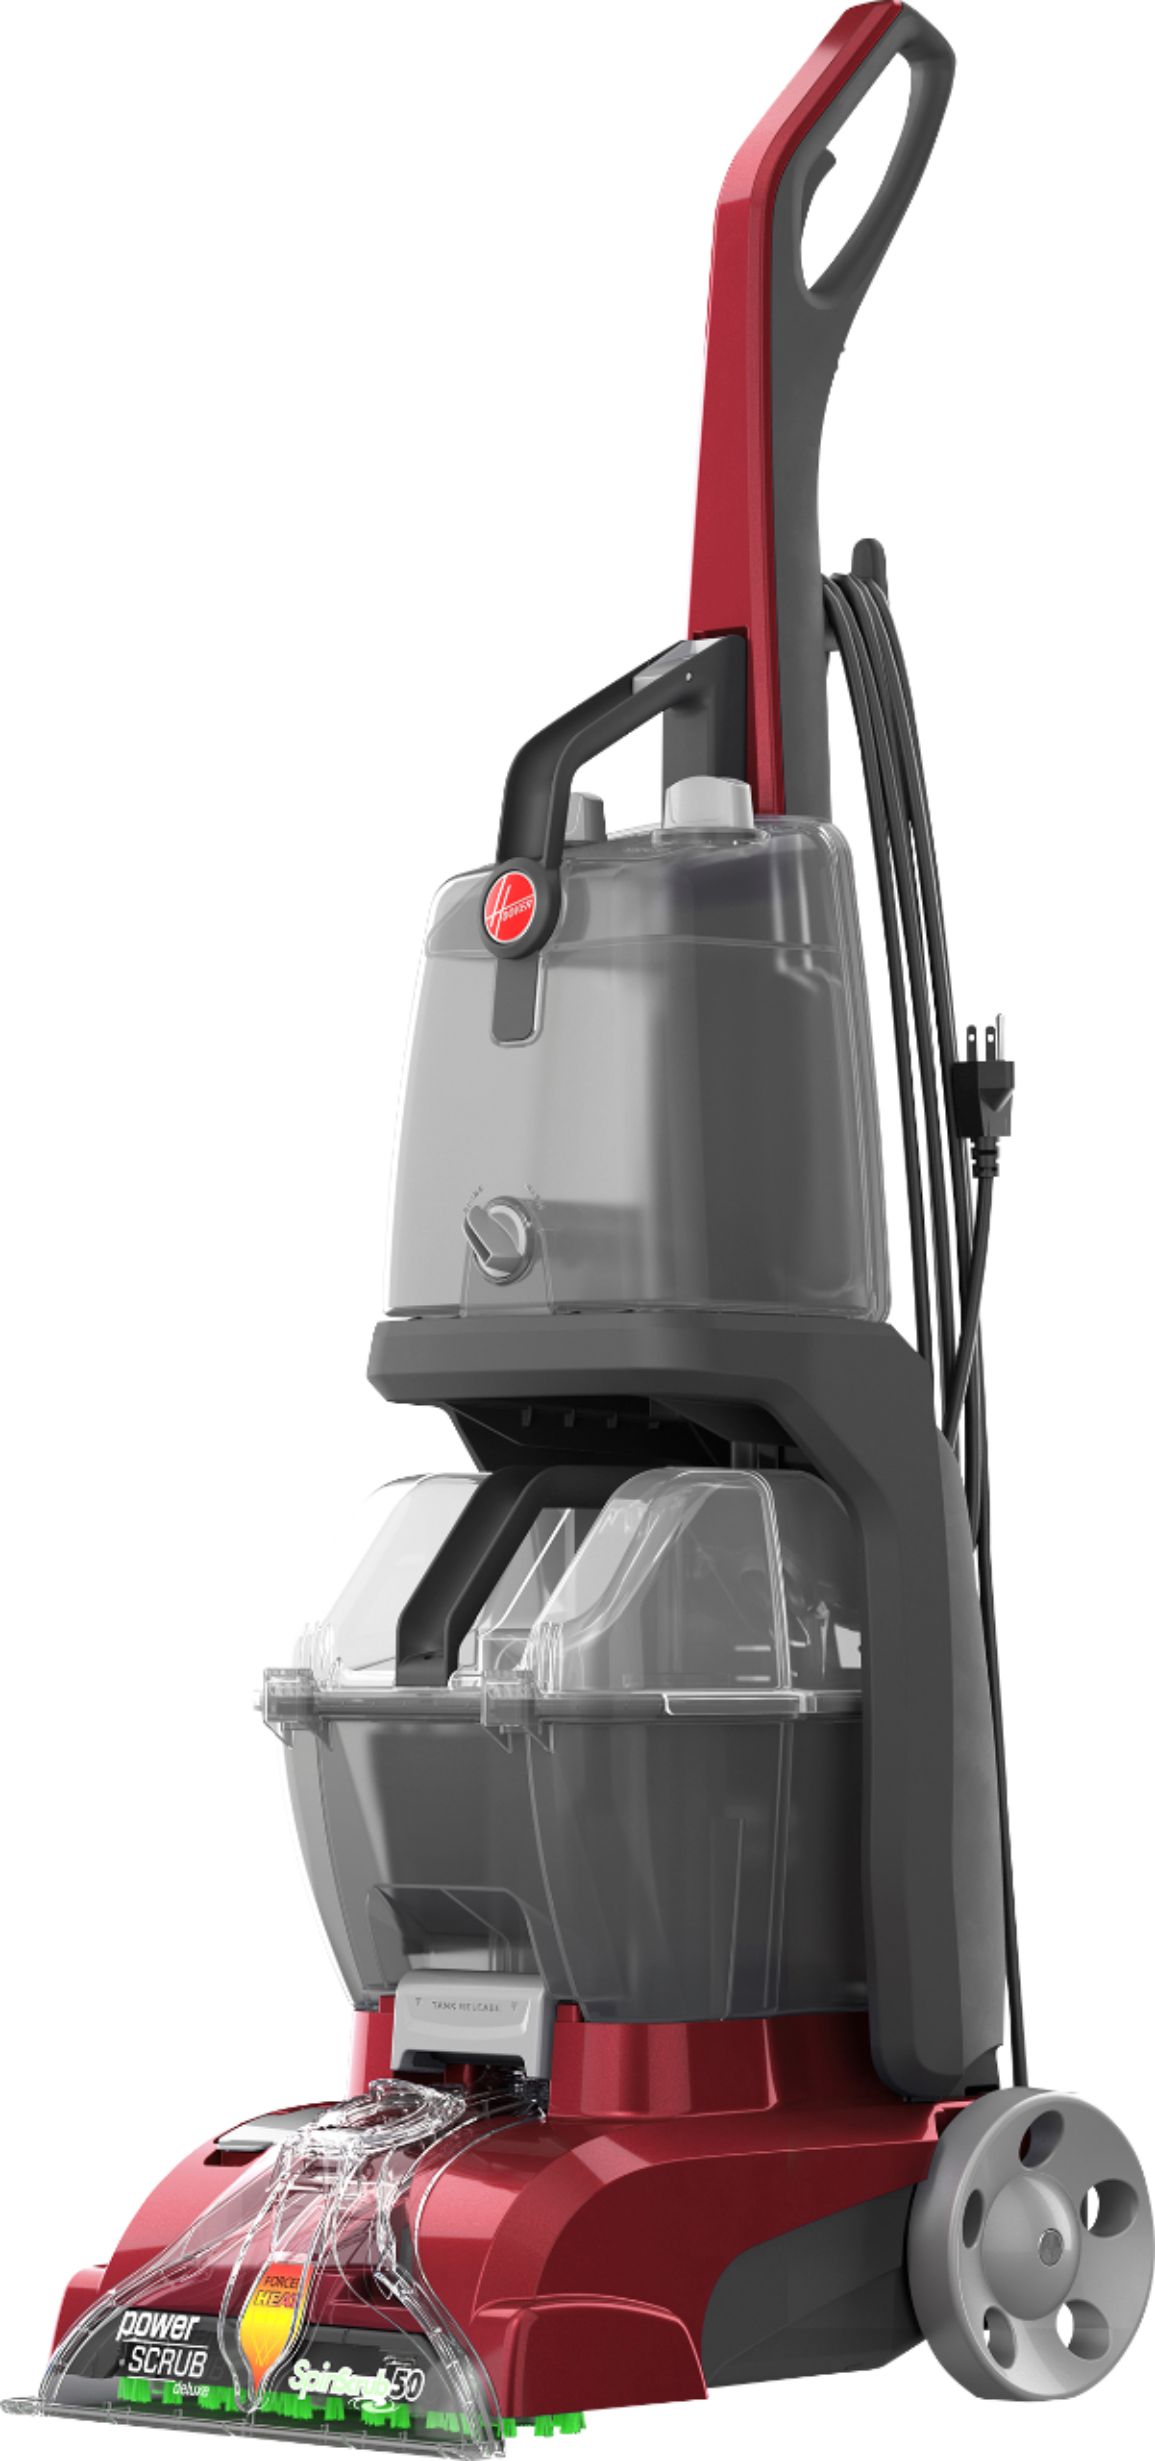 Hoover Power Scrub Deluxe Carpet Cleaner Machine Re Upright Shampooer FH50150 